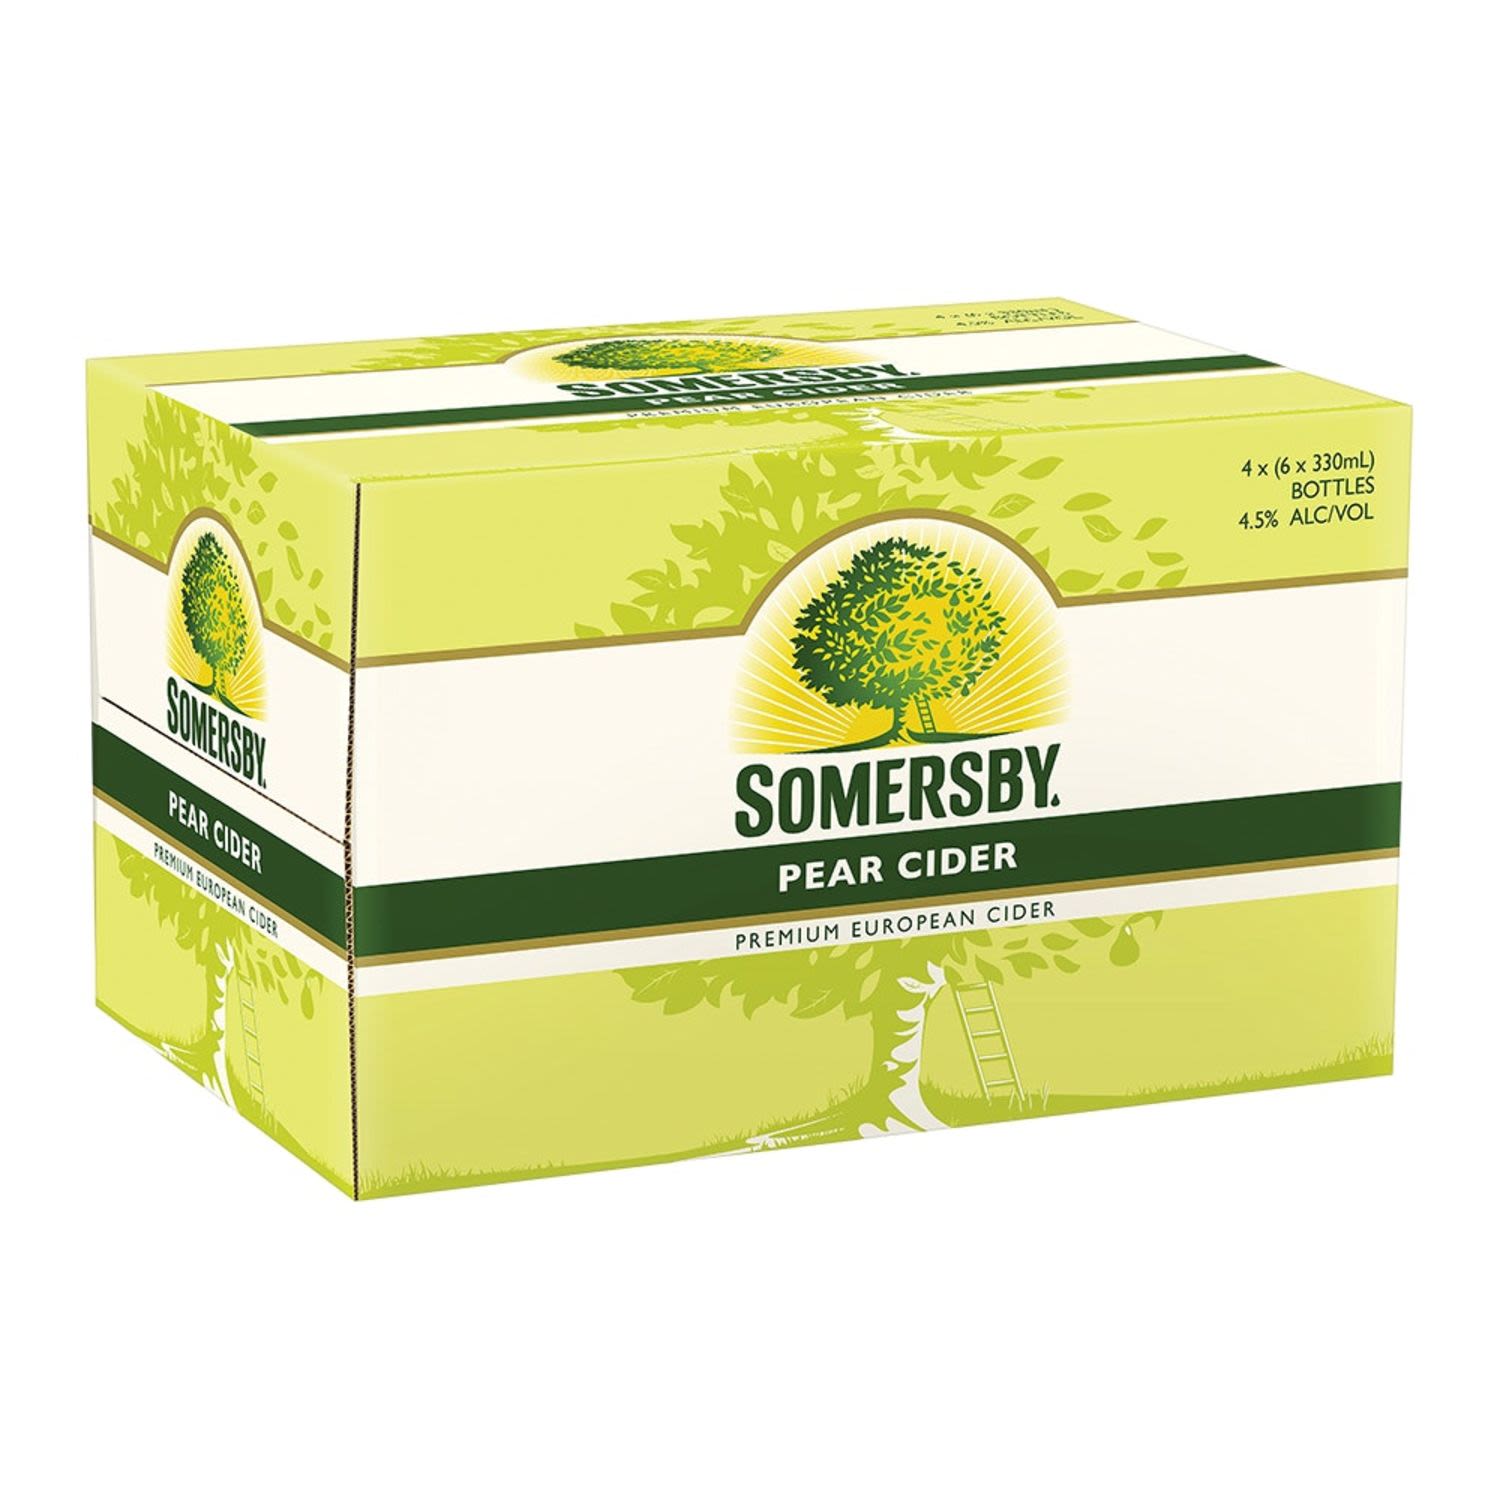 Somersby Pear Cider Bottle 330mL 24 Pack